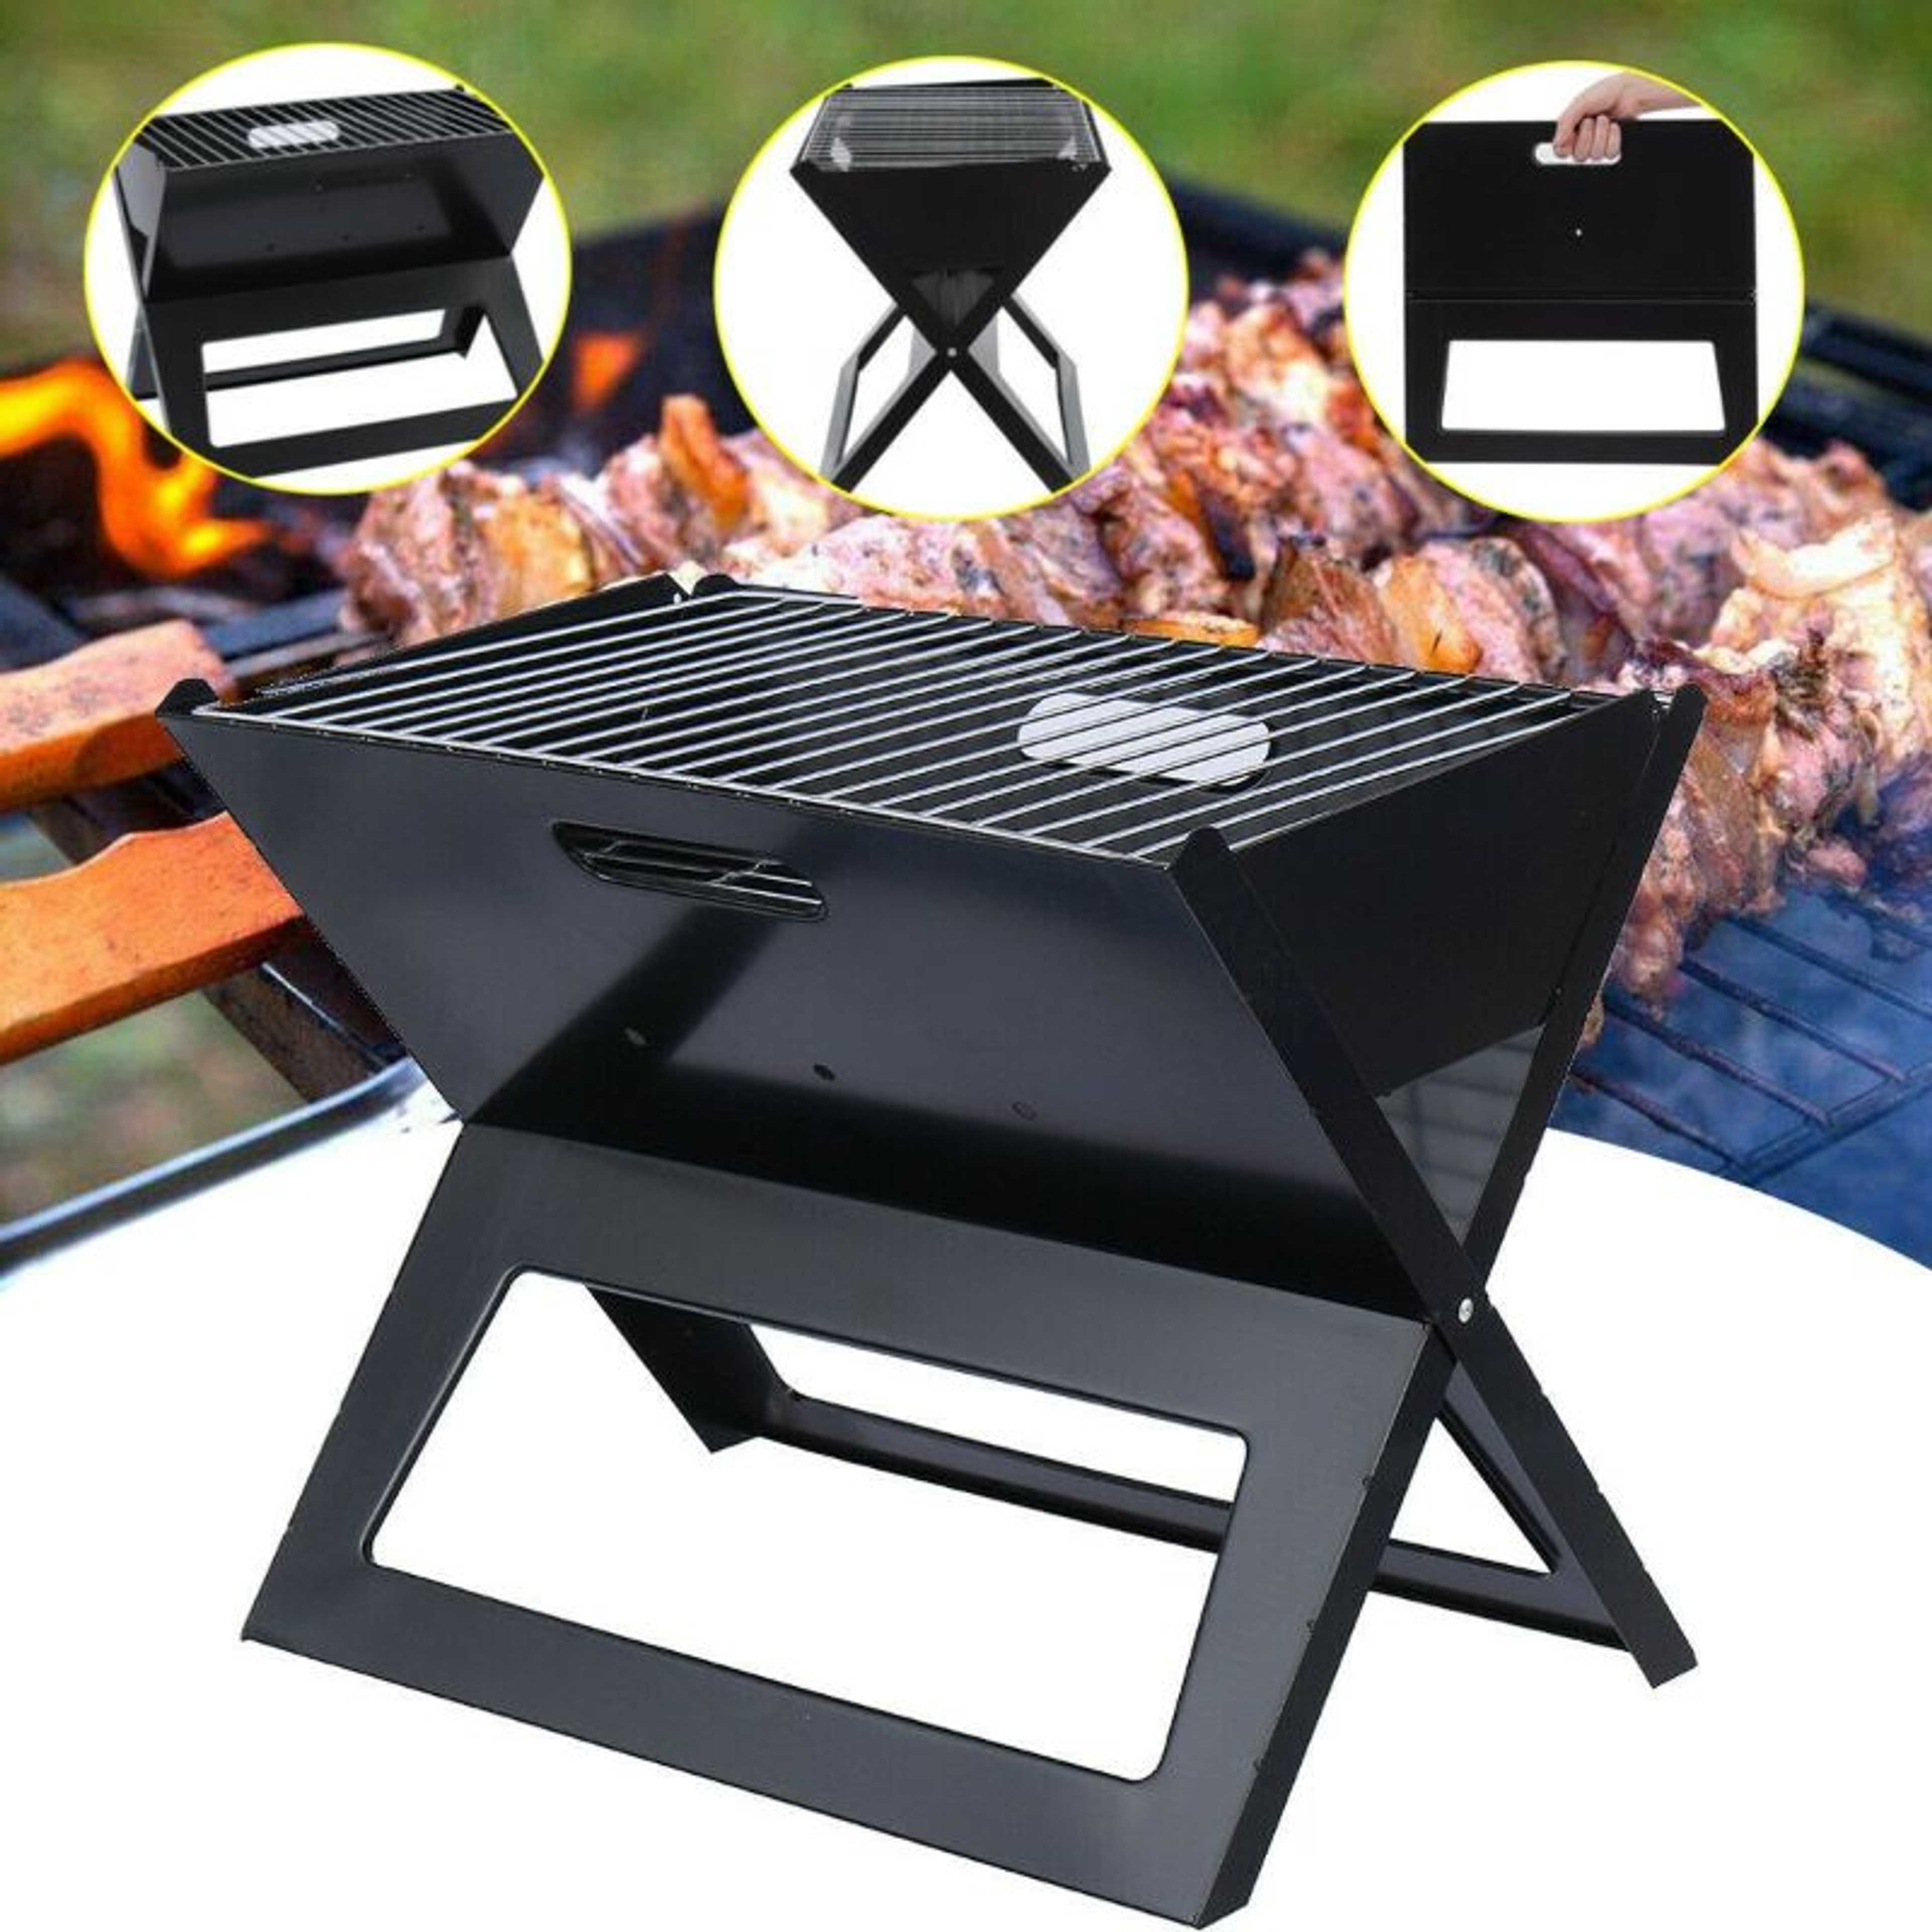 Portable Suitcase Style Folding Charcoal BBQ Indoor/Outdoor Living Barbecue Cooking Grill Stand